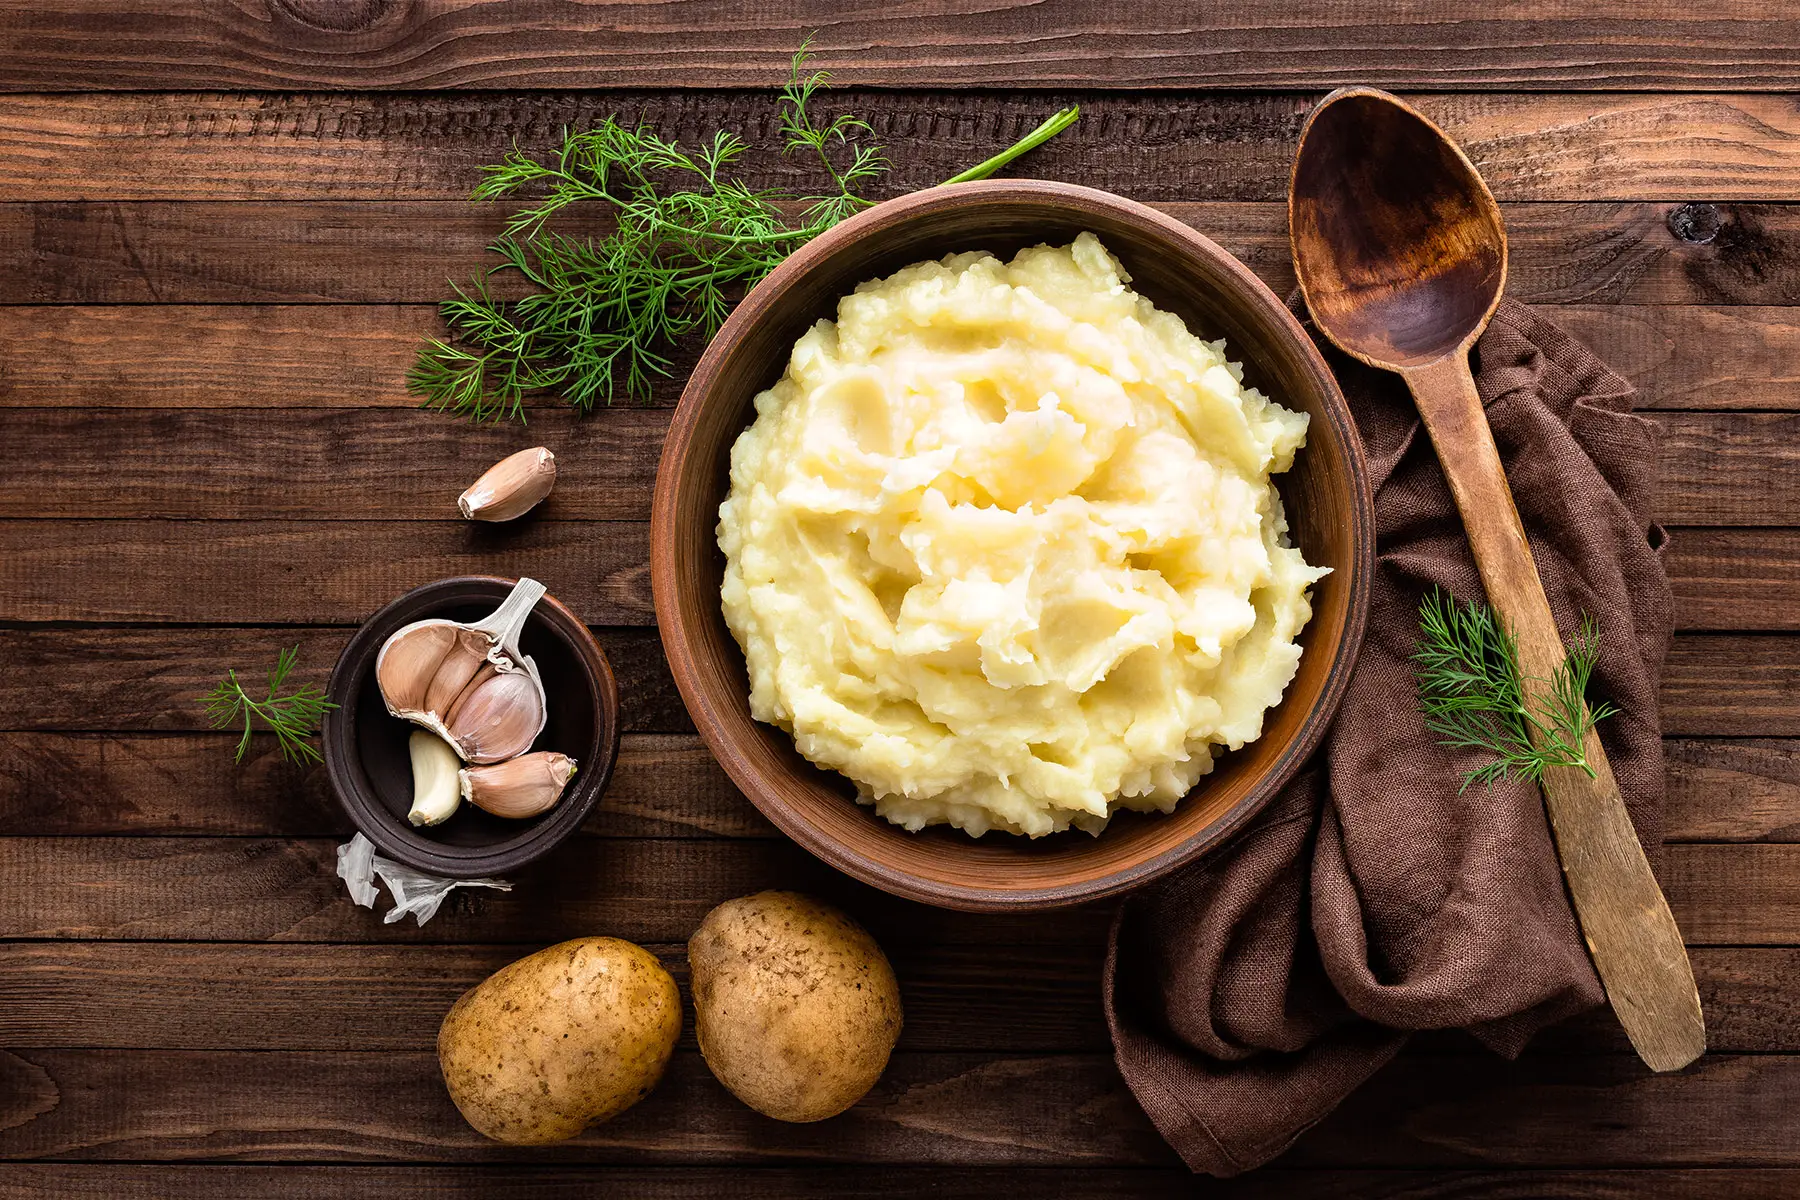 Creamy mashed potatoes are even better with a healthy heap of garlic.